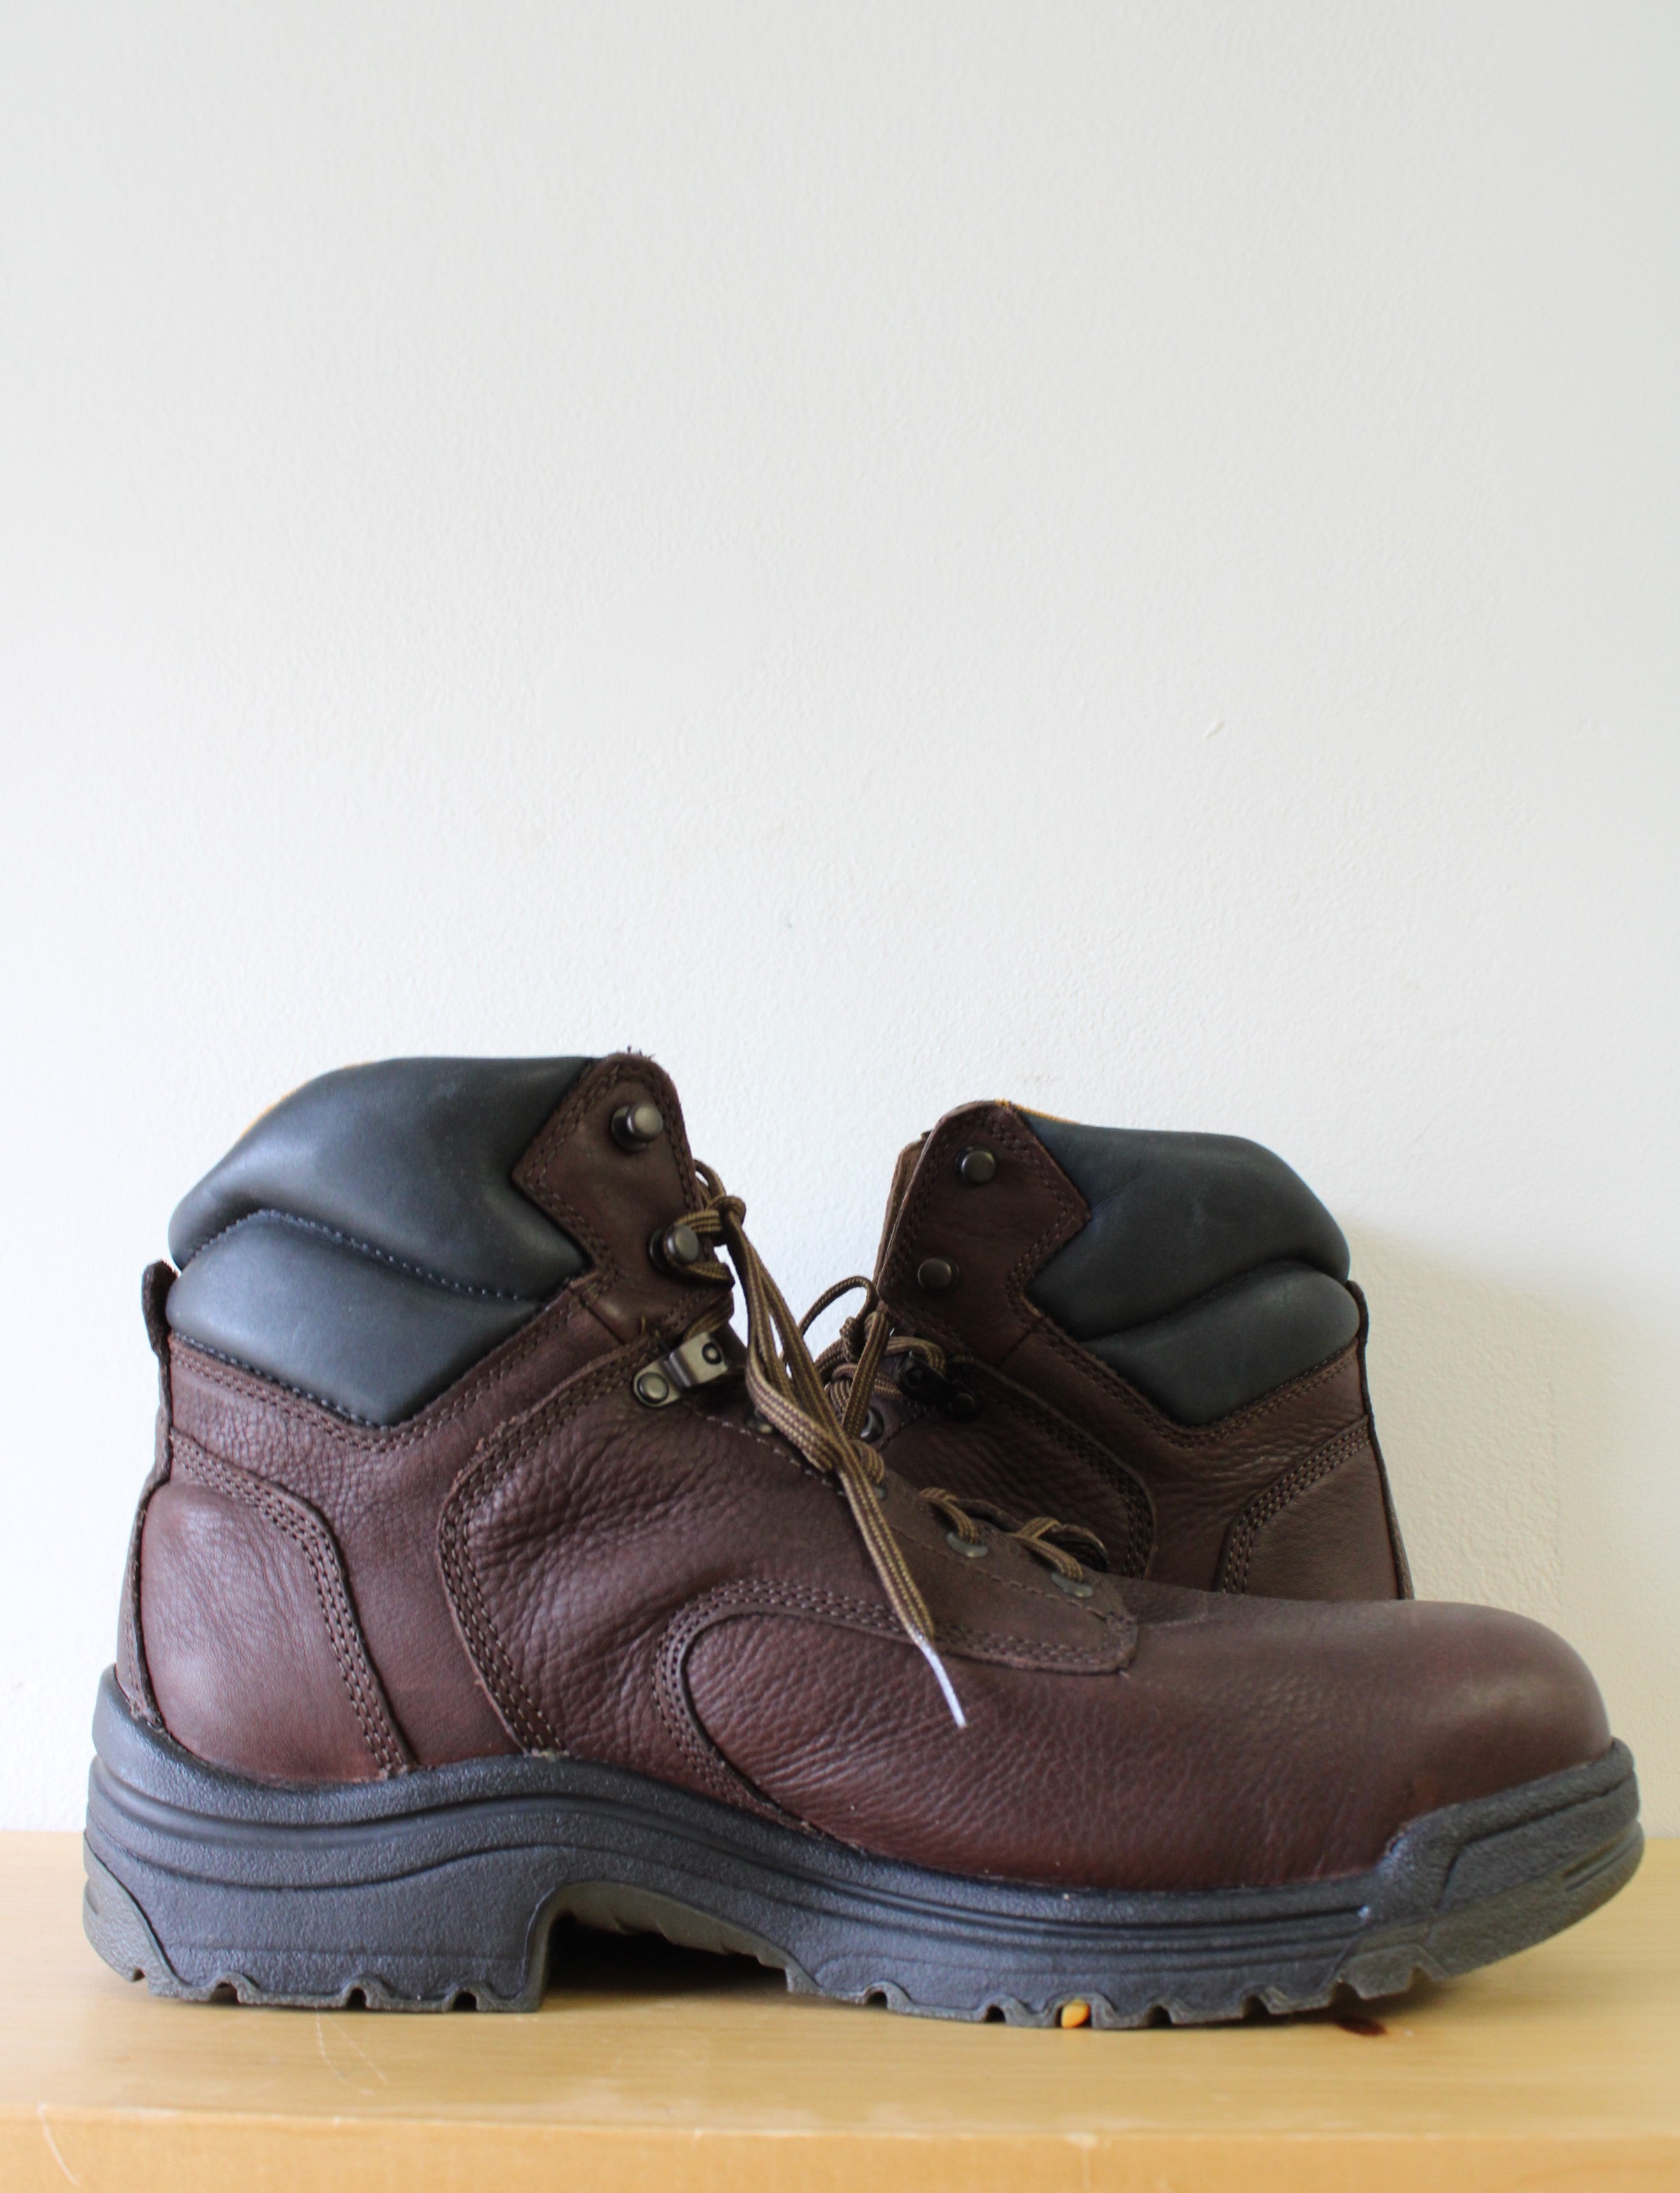 Timberland Titan Waterproof Alloy Toe Safety Boots | Size 13